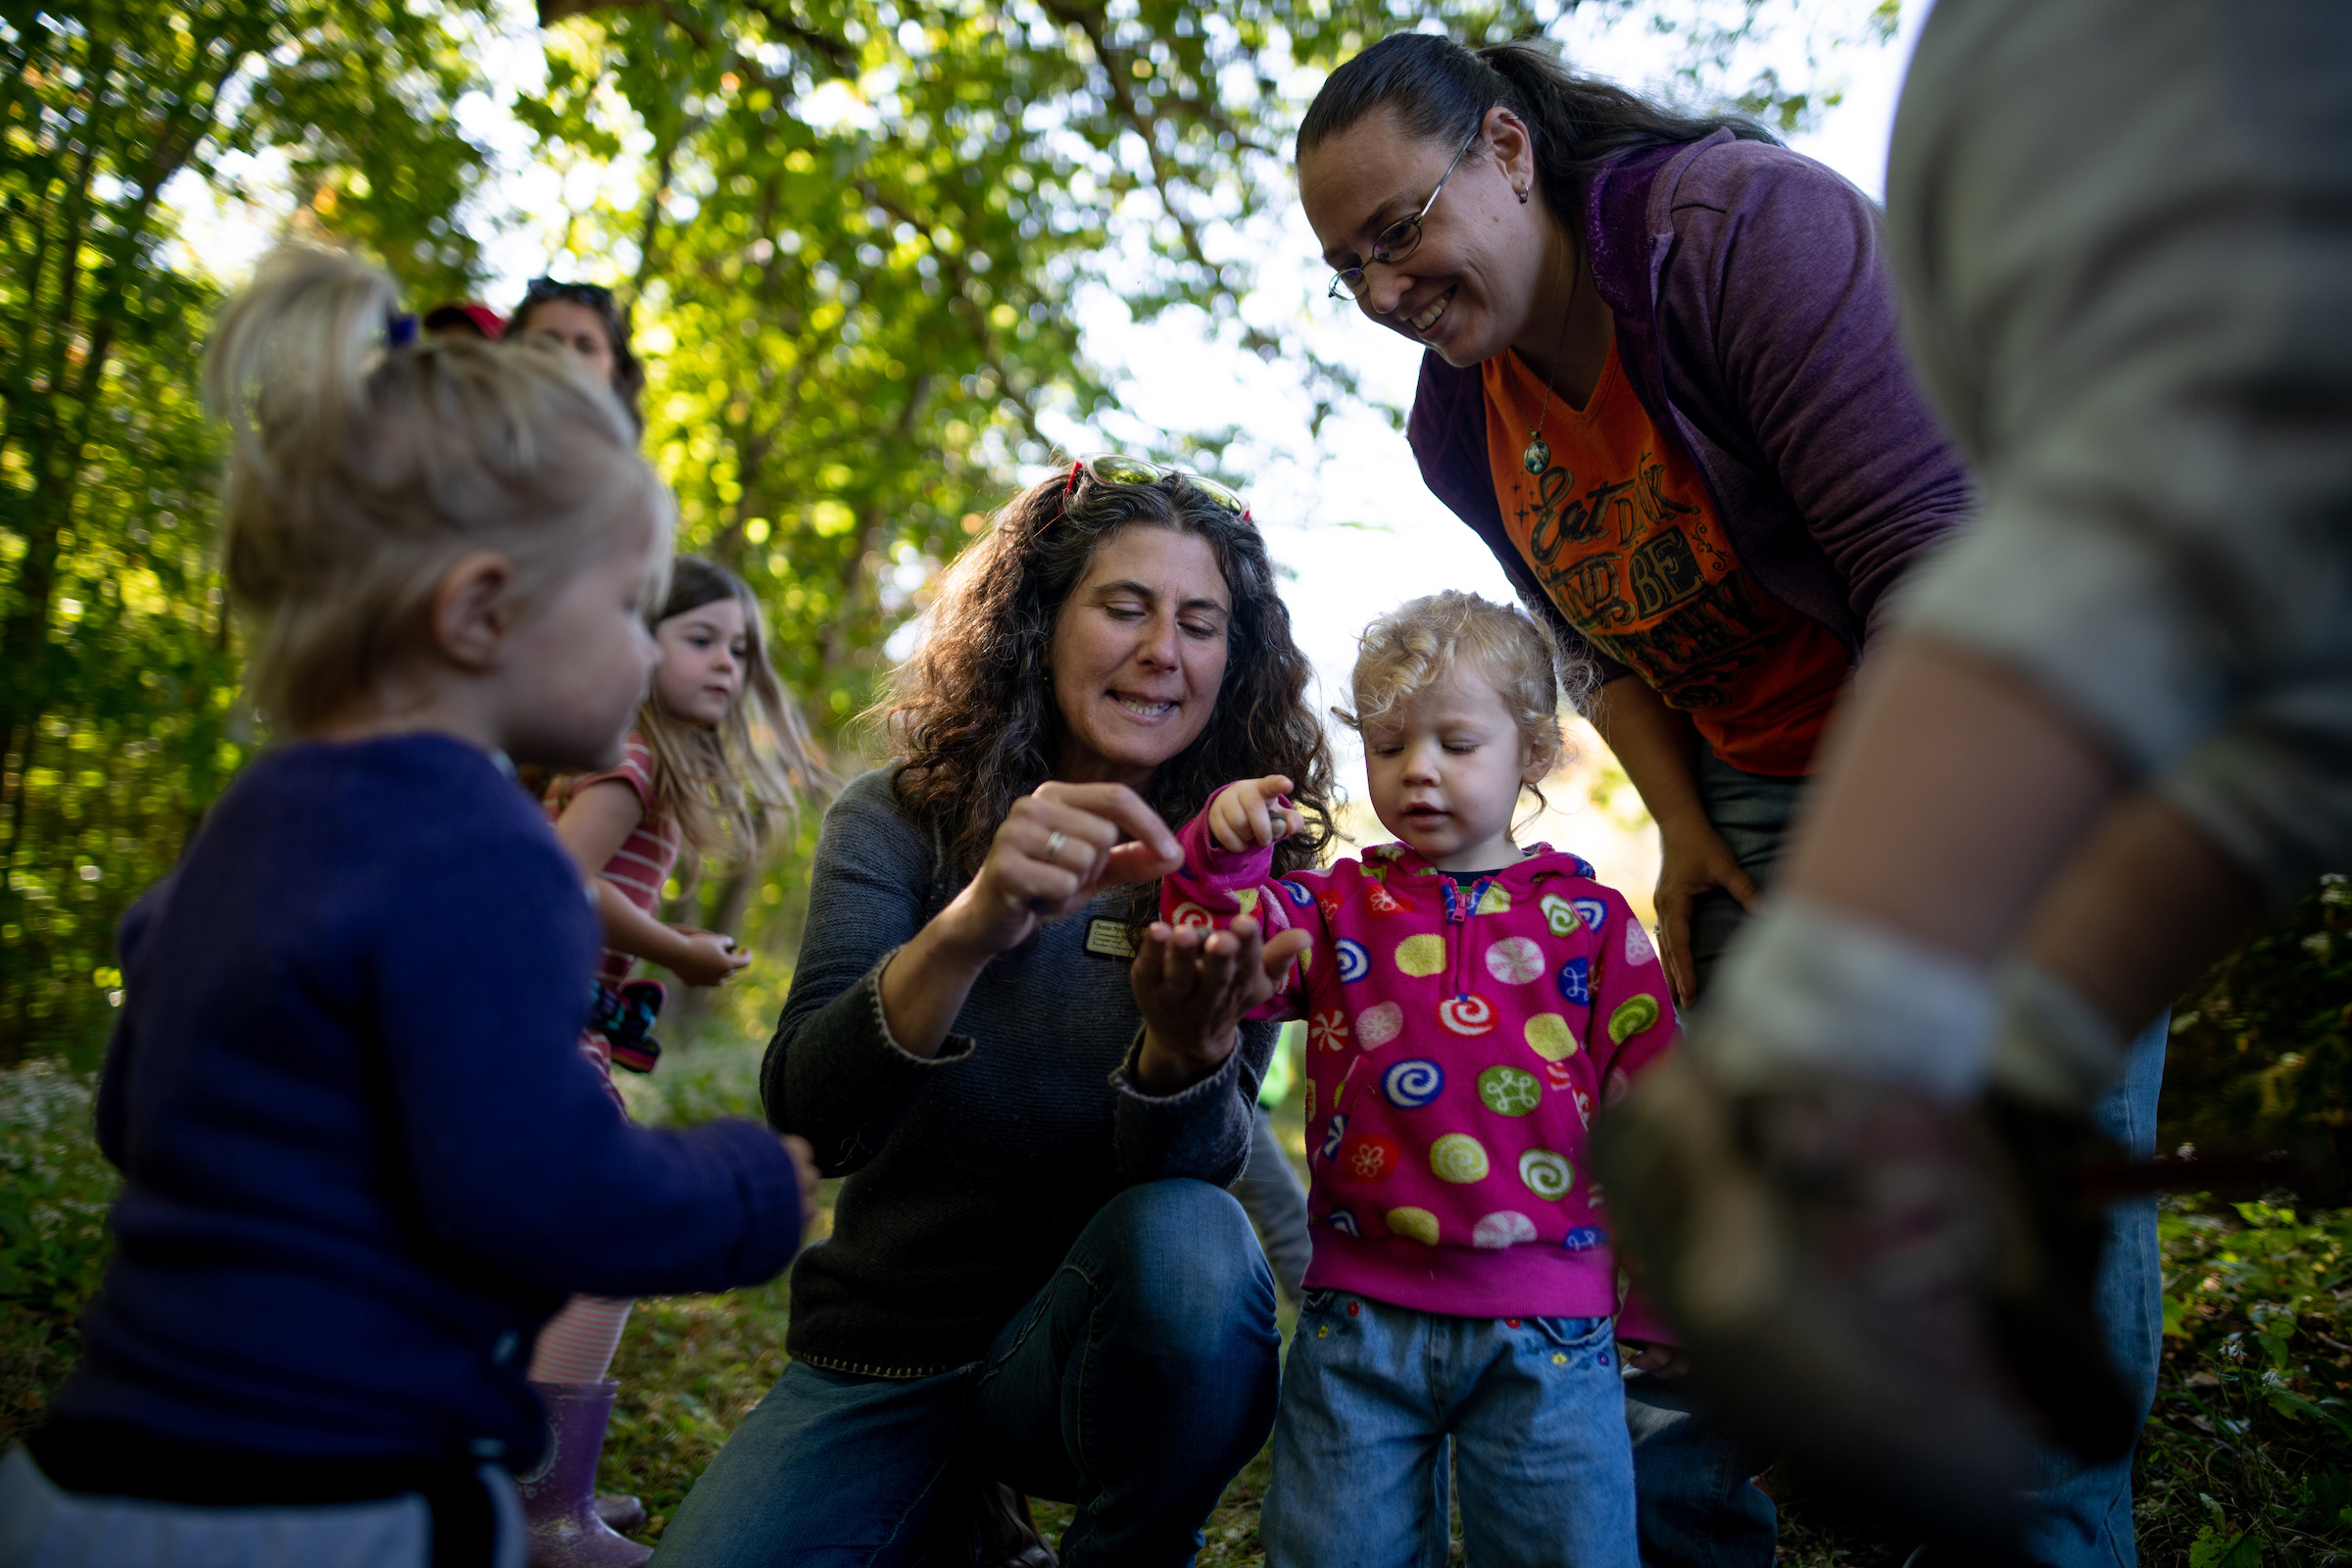 Naturalist Susie Spikol points at something on her hand, while children and parent look on (photo: Ben Conant)